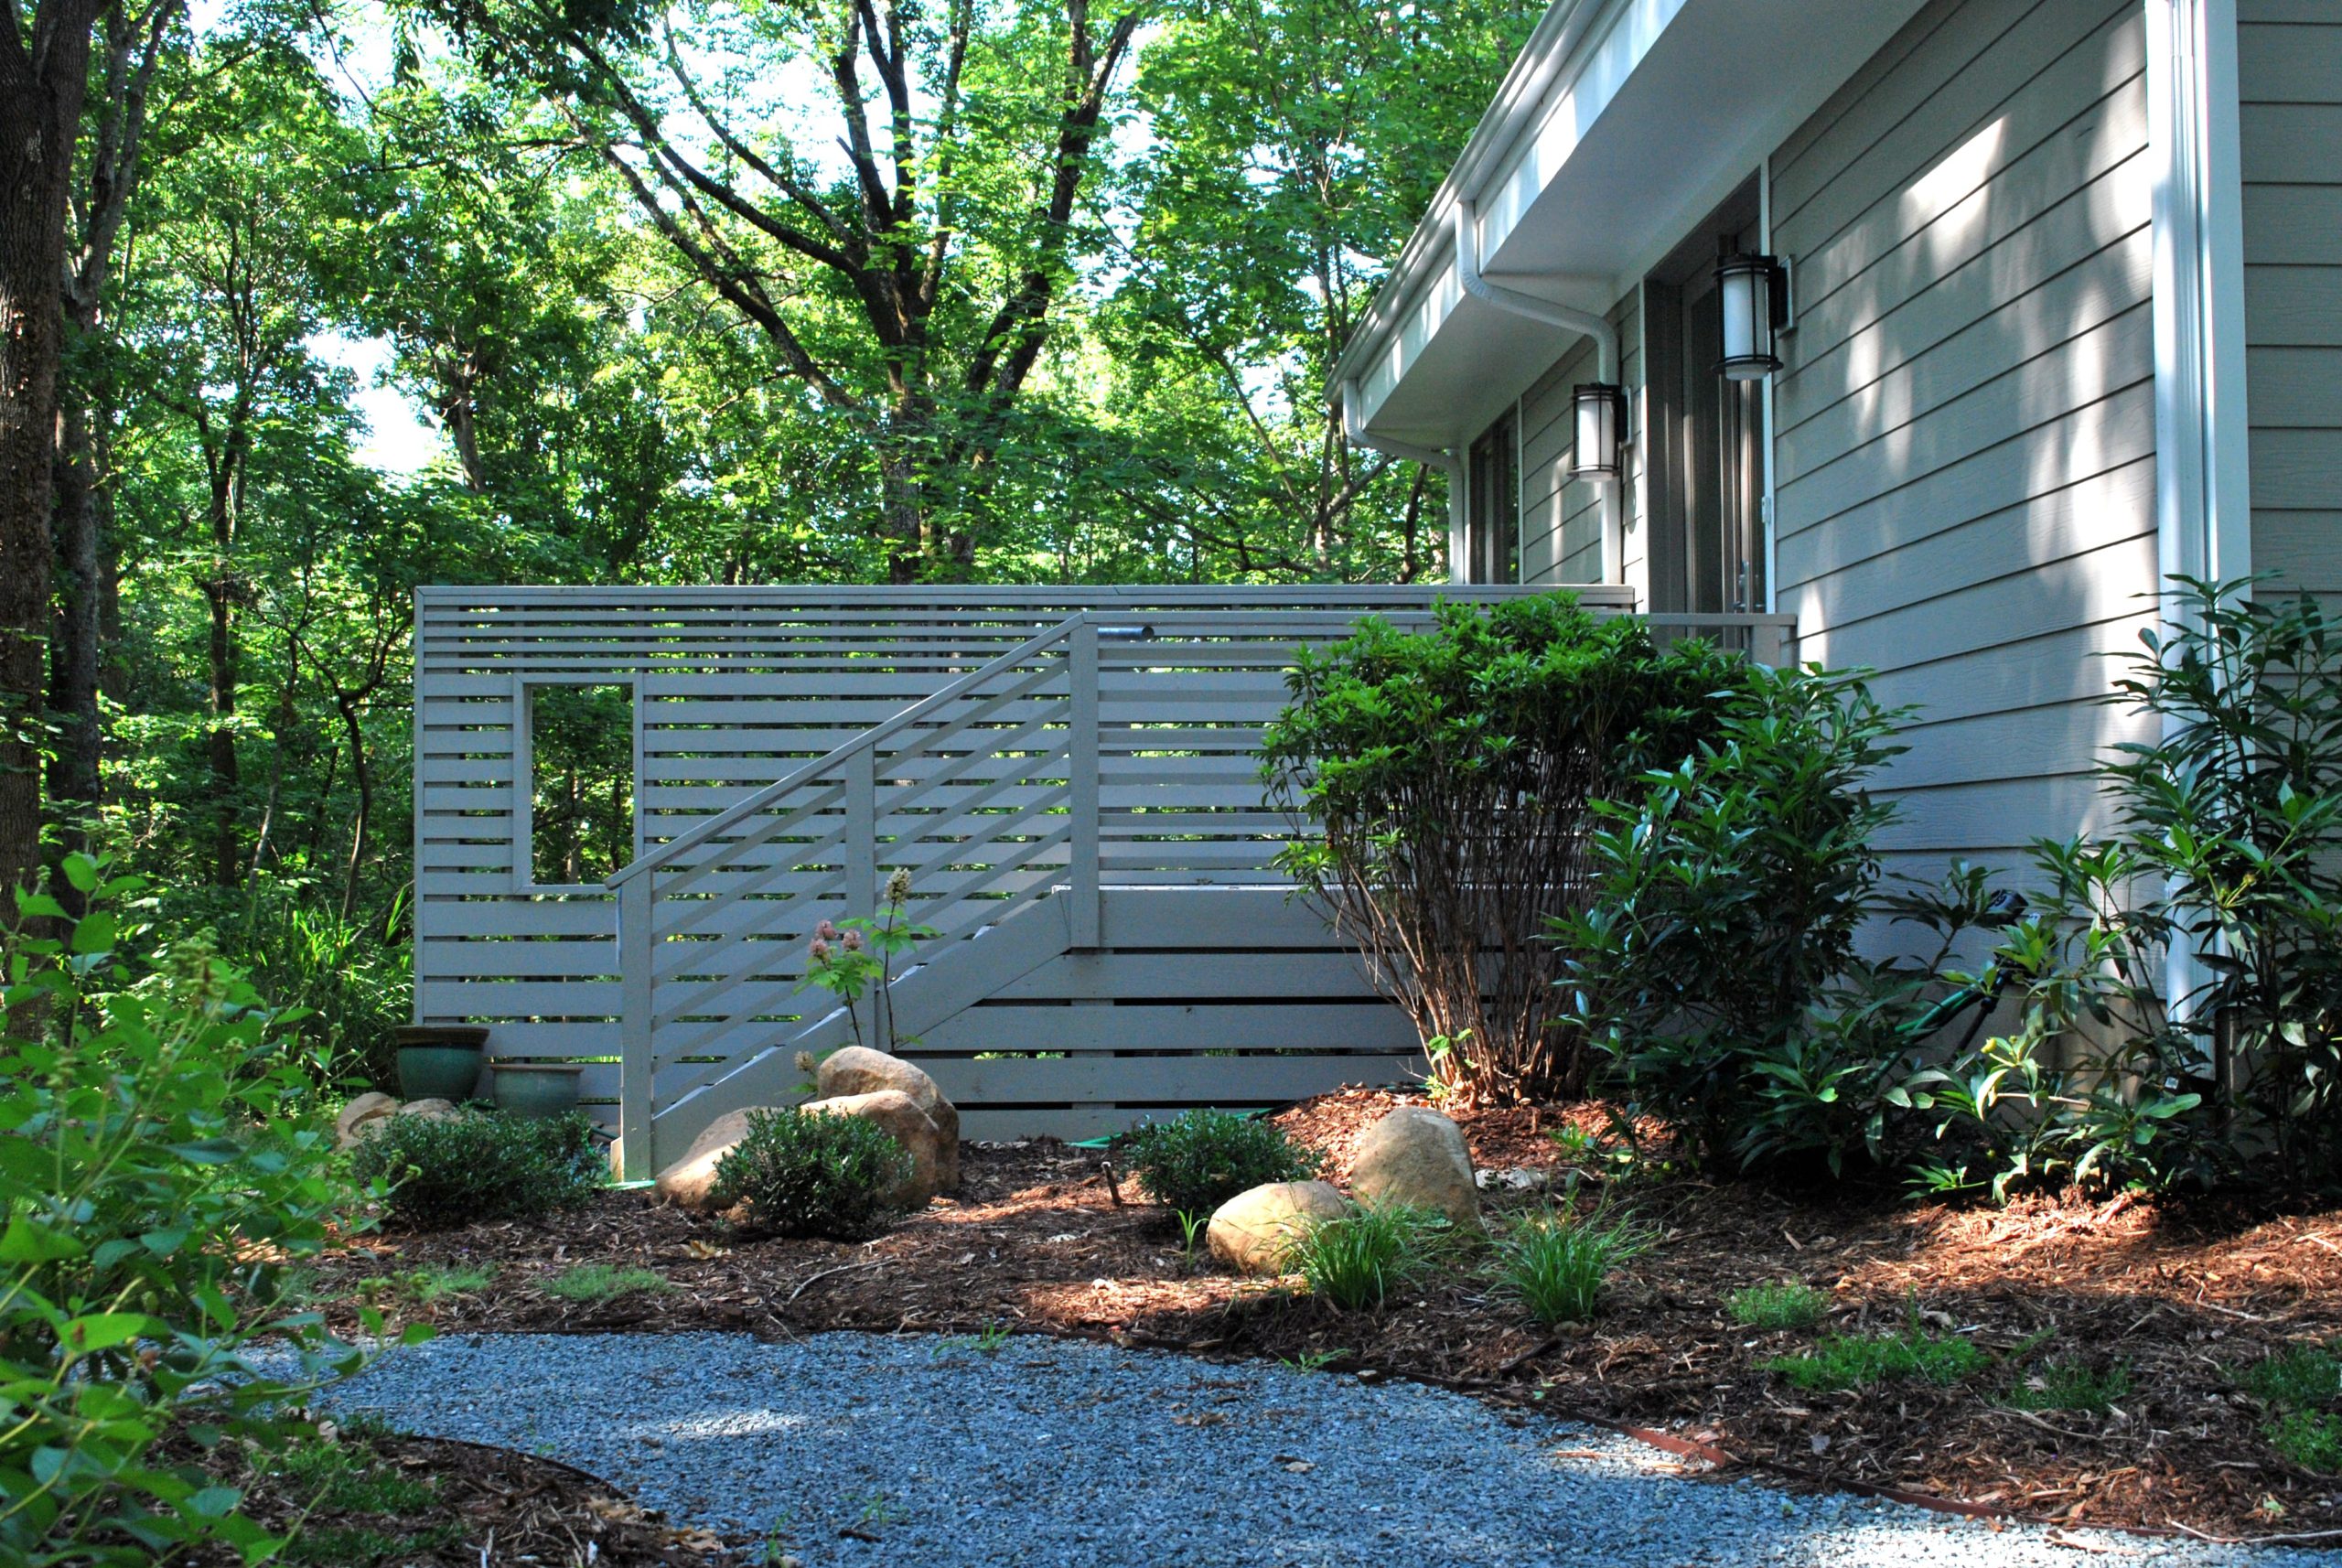 A gravel path through the garden leads to the entry stair and slatted privacy wall, designed to match the rhythm and color of the house's exterior